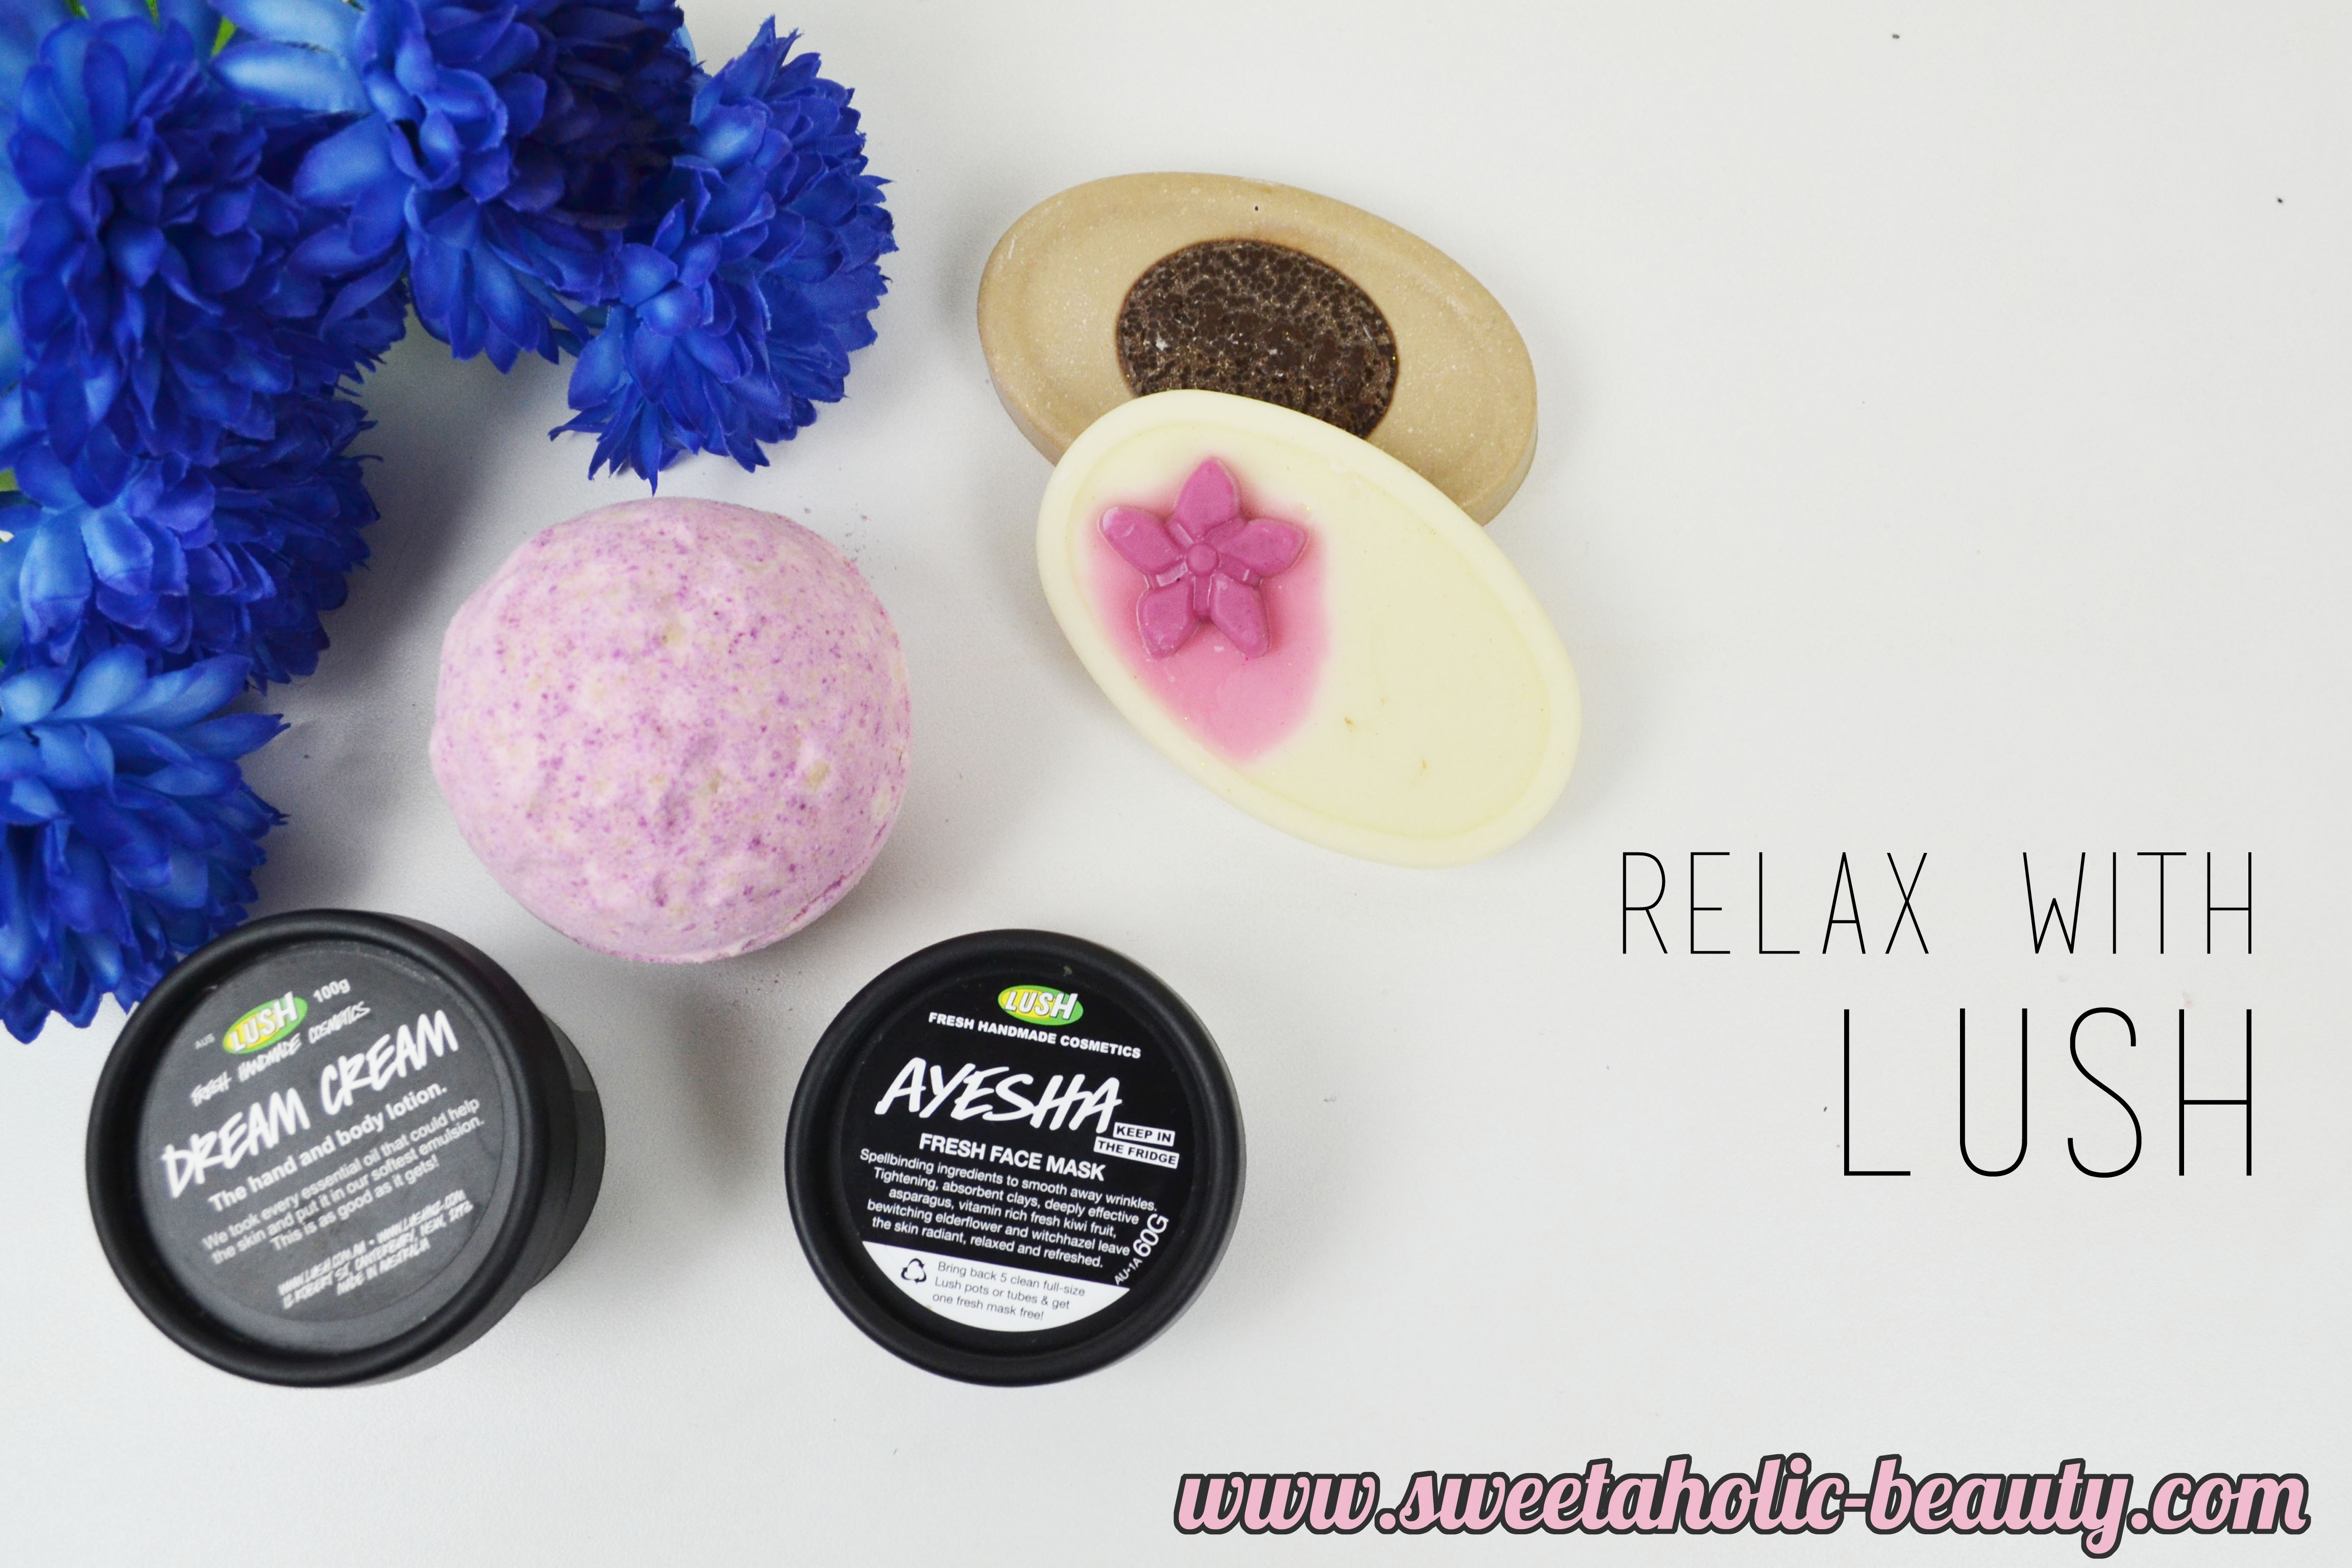 Relax with Lush - Sweetaholic Beauty